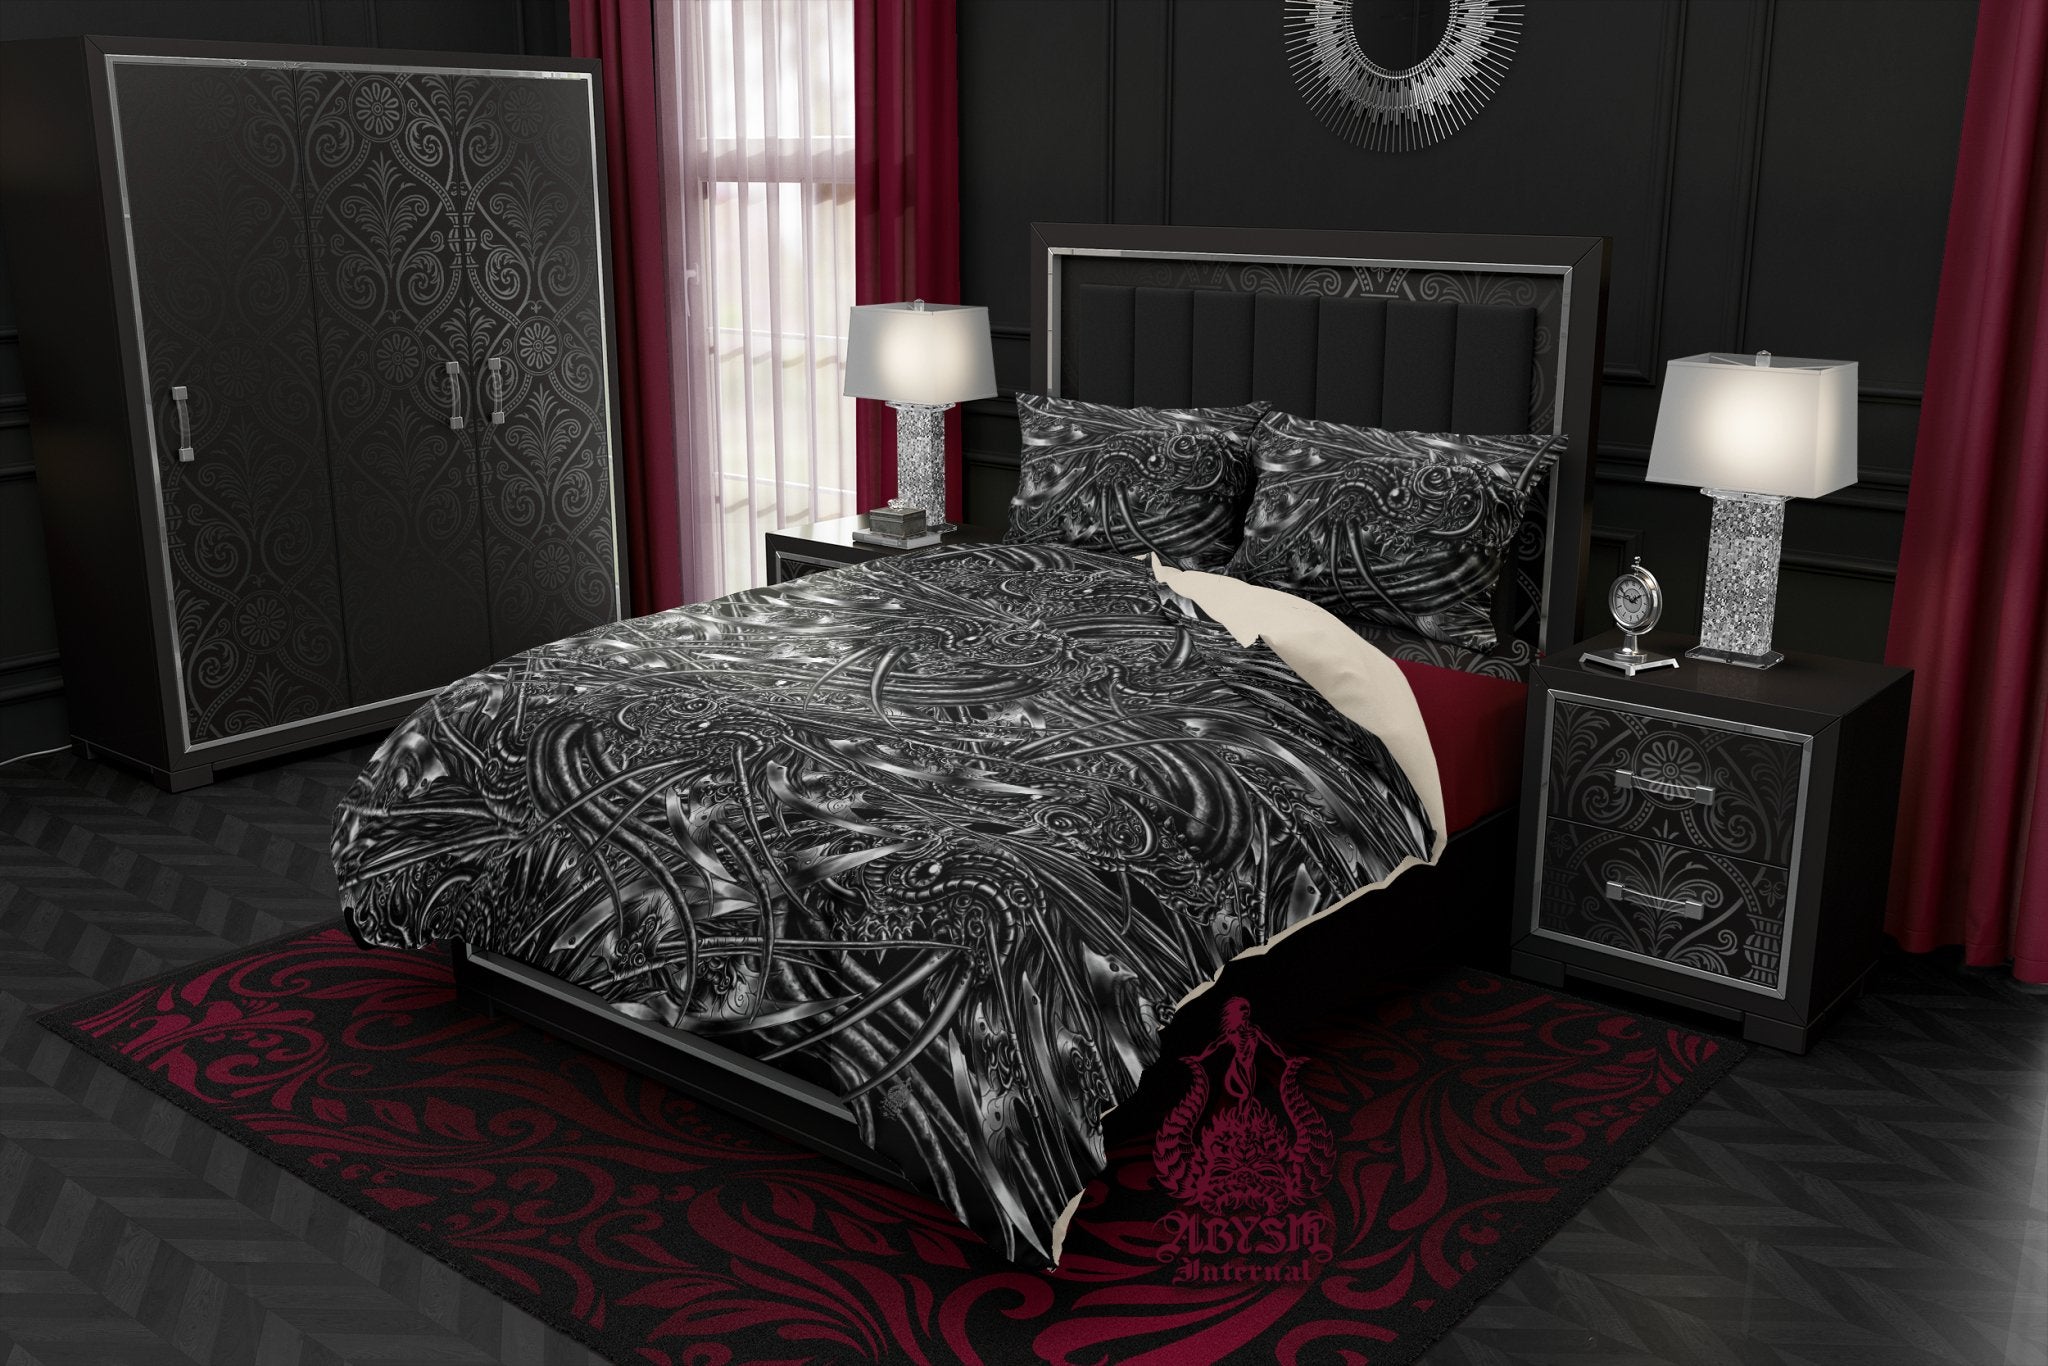 Gothic Bedding Set, Comforter or Duvet, Dark Tattoo Art Print, Alien Room, Abstract Black and White Alternative Bed Cover, Bedroom Decor, King, Queen & Twin Size - Abysm Internal